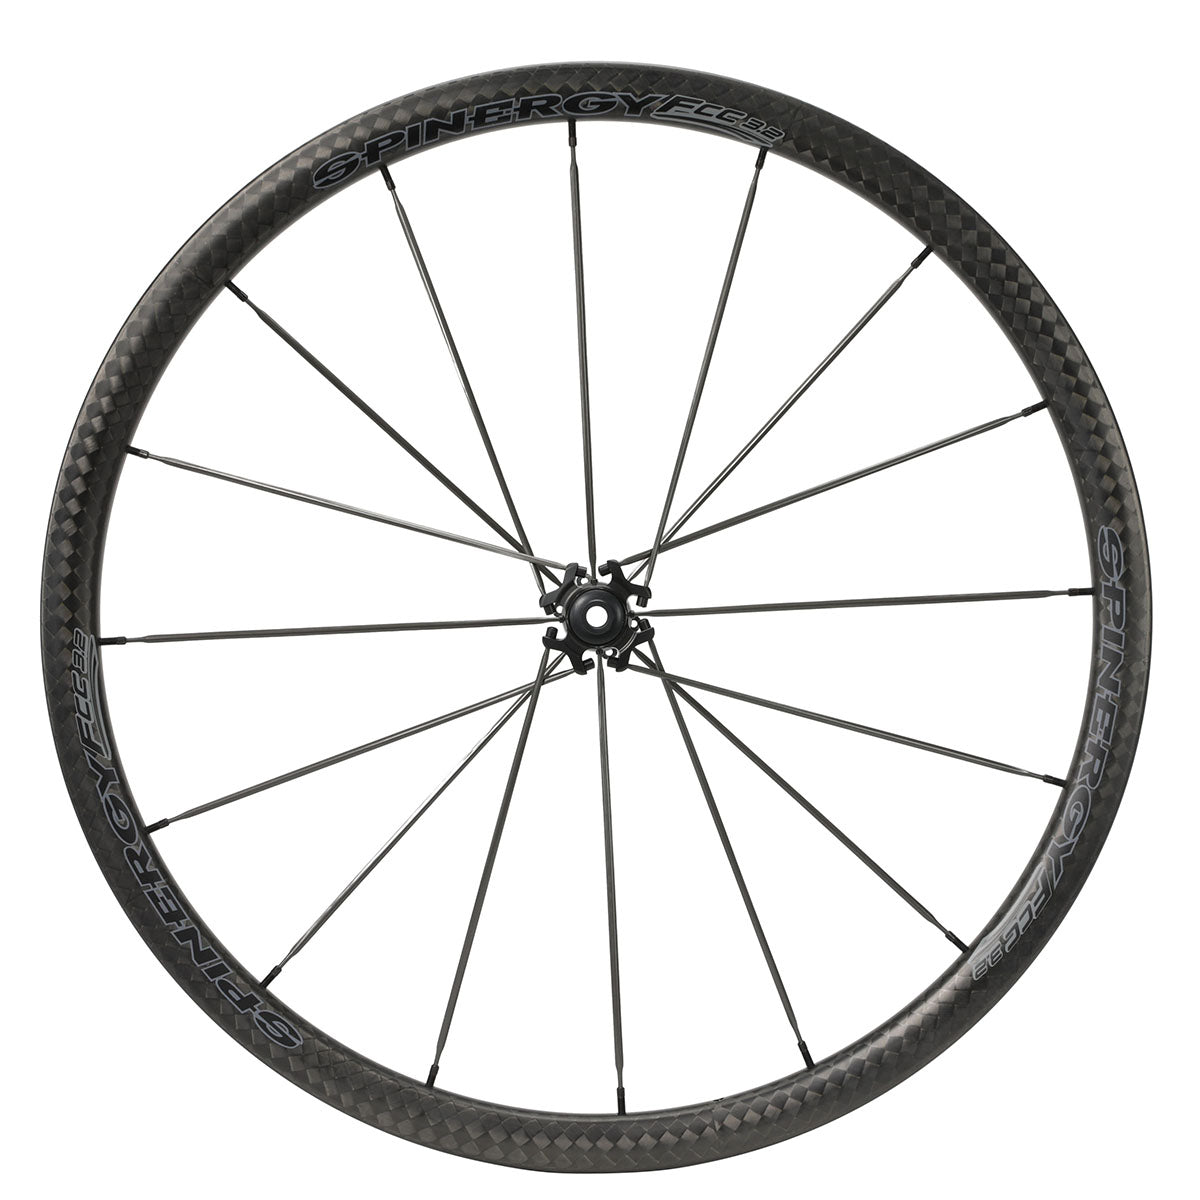 SPINERGY FCC 32 700c Front & Rear Wheel Set for Road (Improved "44" Hub) - QUICK RELEASE FRONT HUB